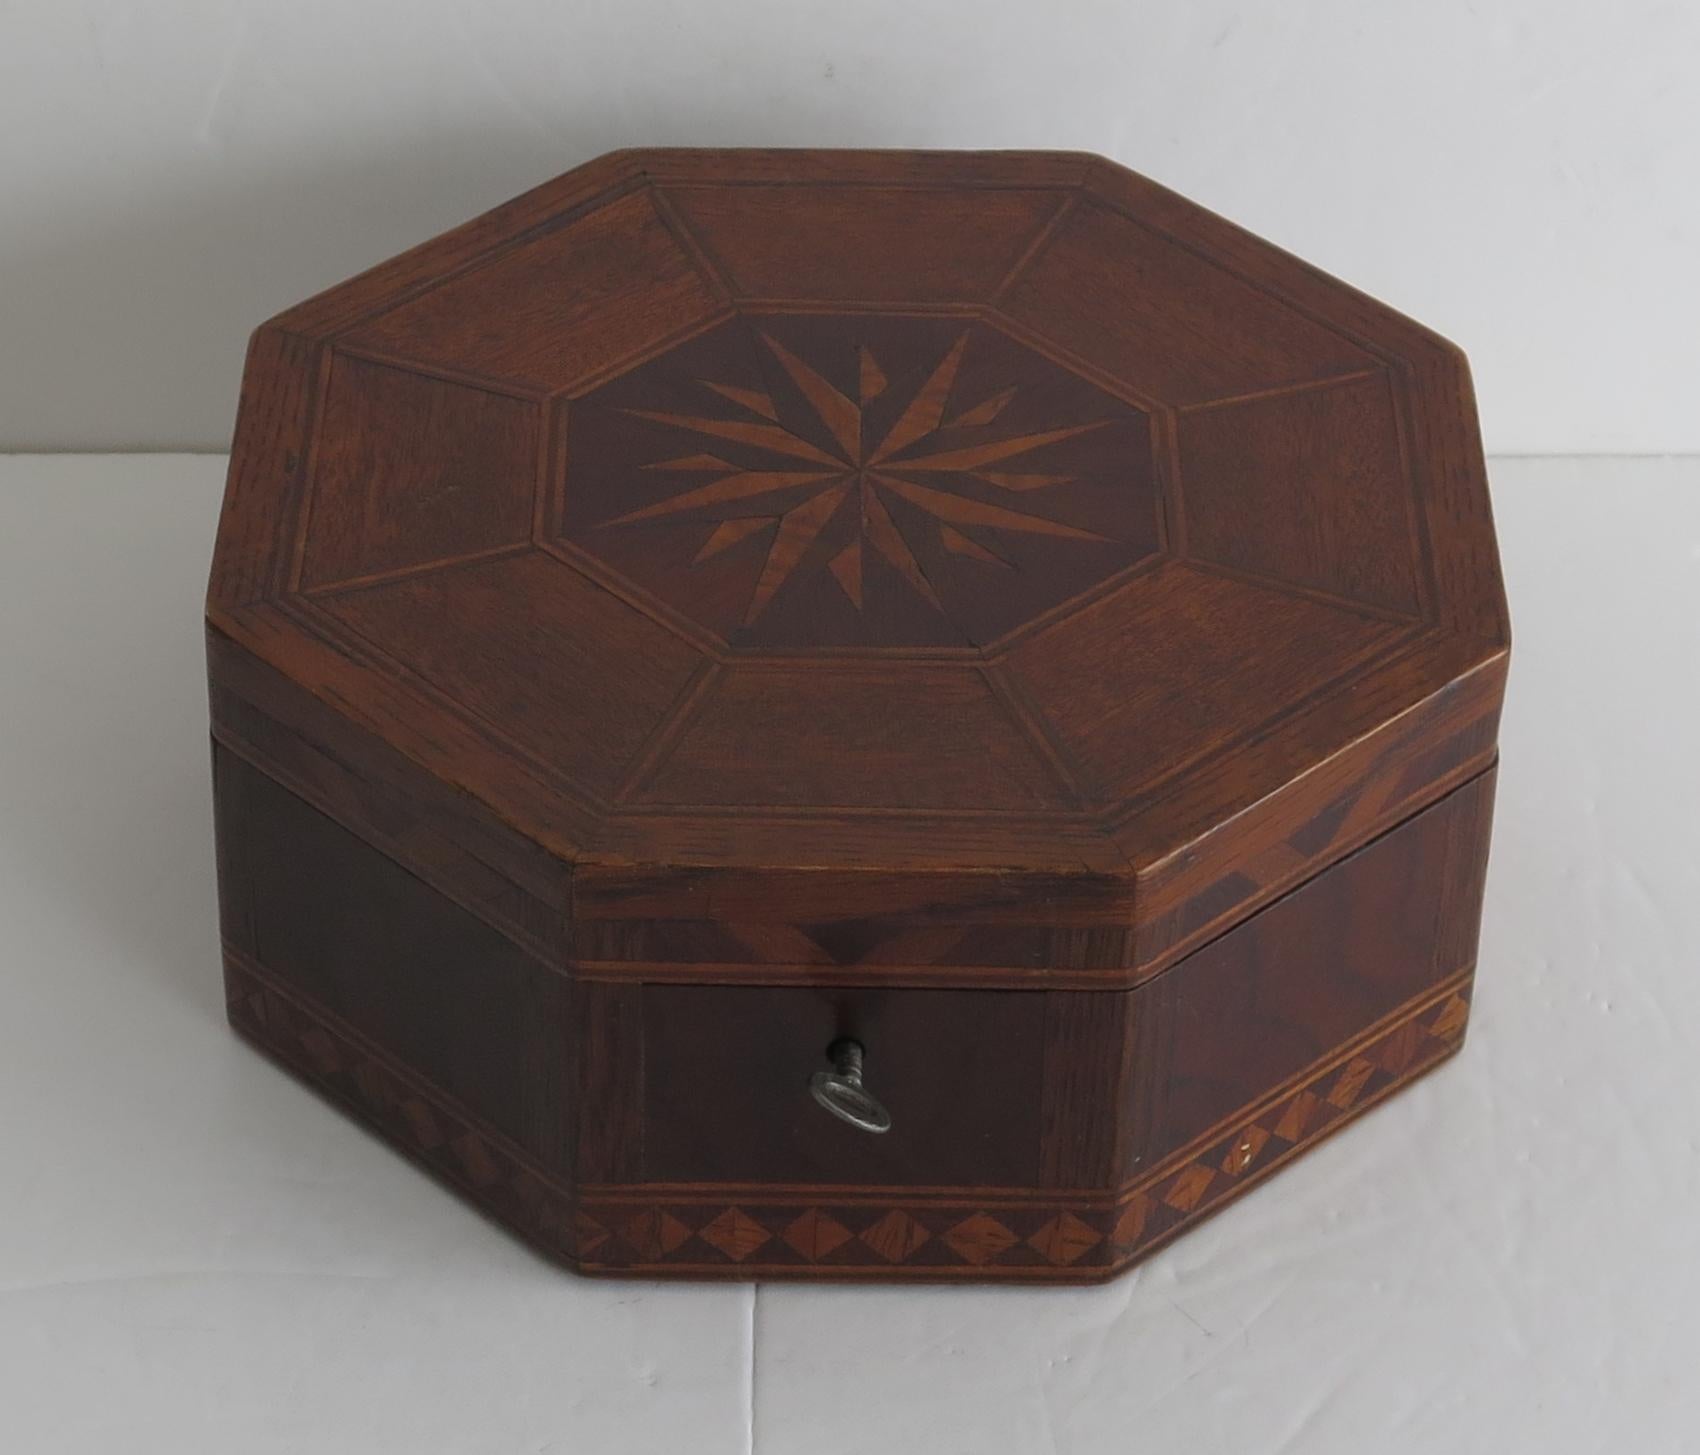 This is a beautifully hand made oak Sewing Box, of octagonal form with inlaid sunburst top, fully fitted interior and having a working lock and key, all dating to circa 1840.

The box has an octagonal form and is fully fitted out internally with a